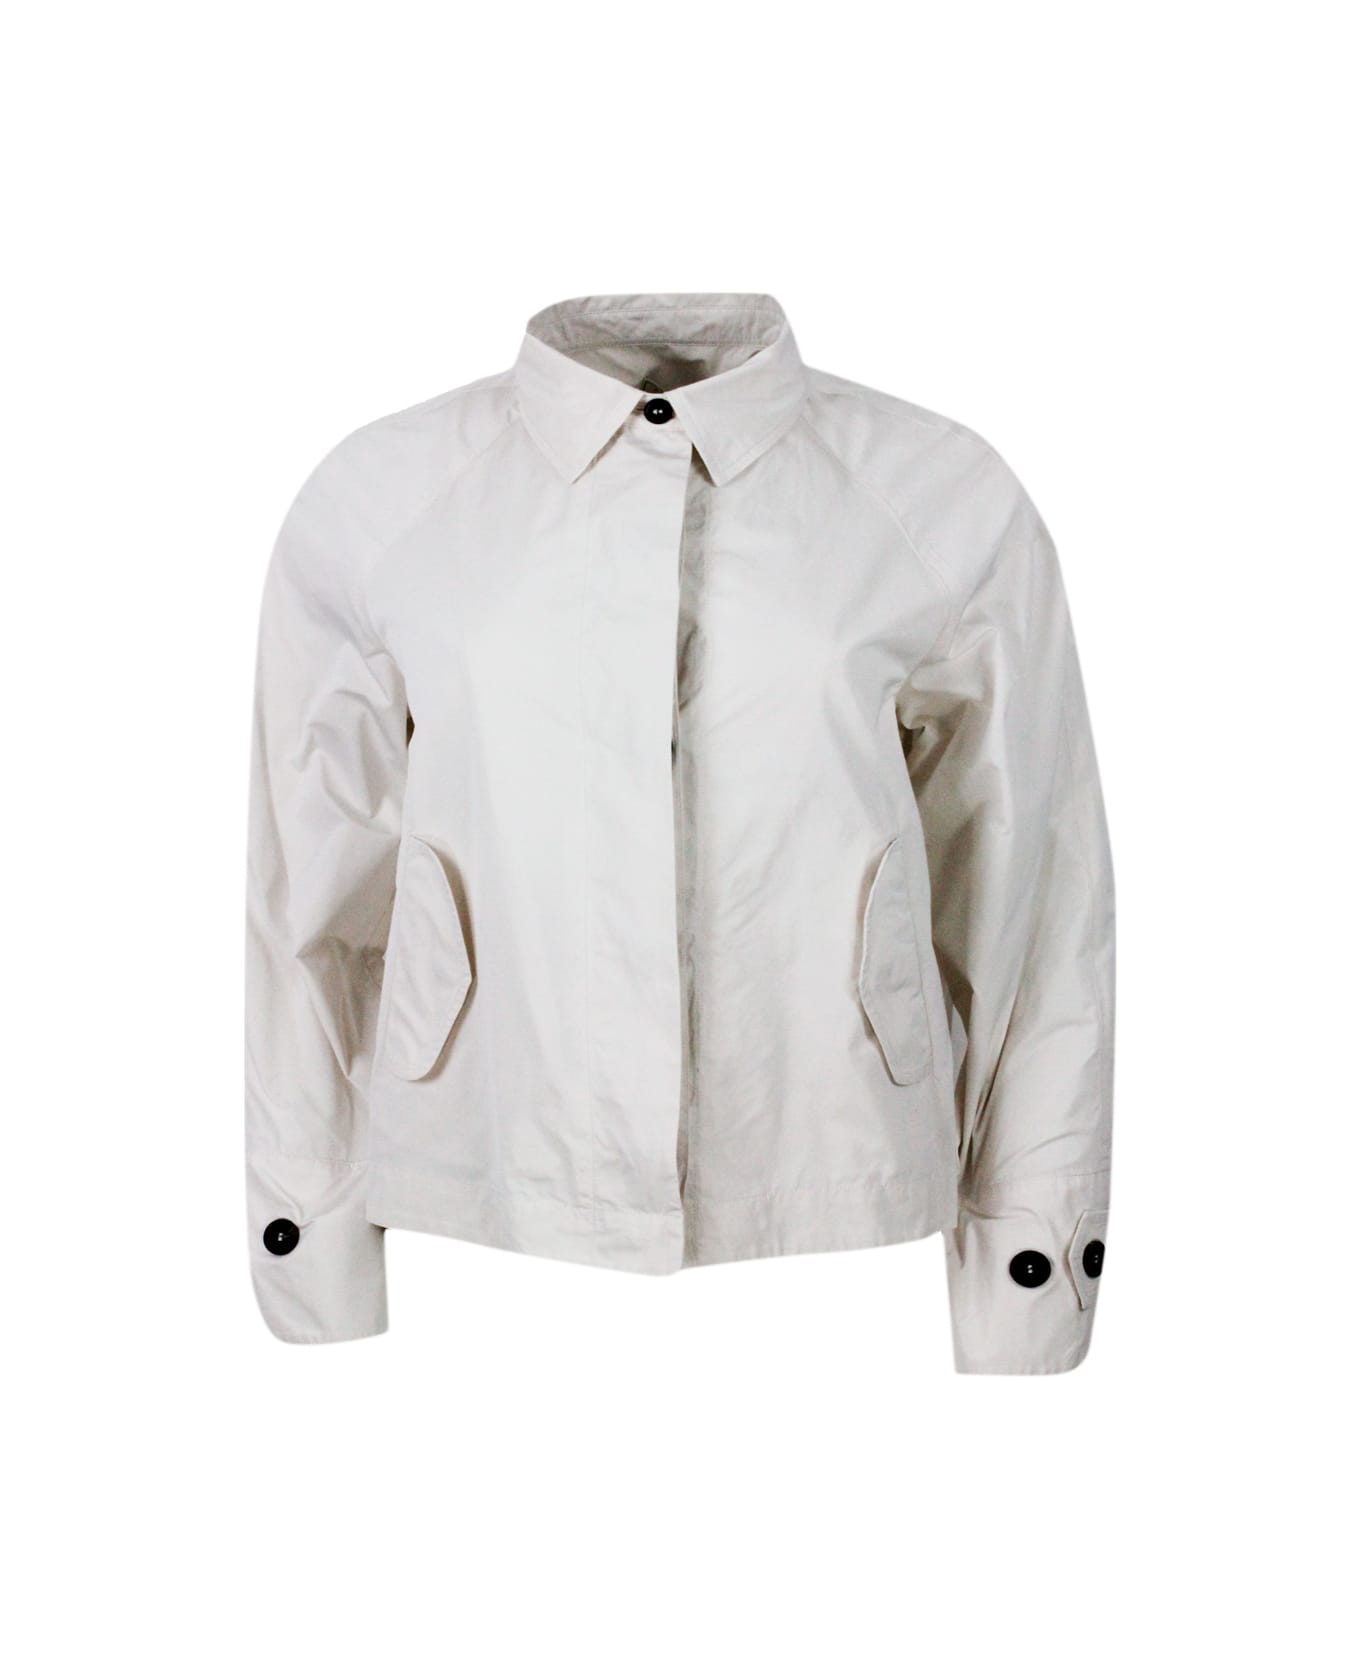 Antonelli Lightweight Windproof Jacket With Shirt Collar, Button Closure And Side Pockets - cream